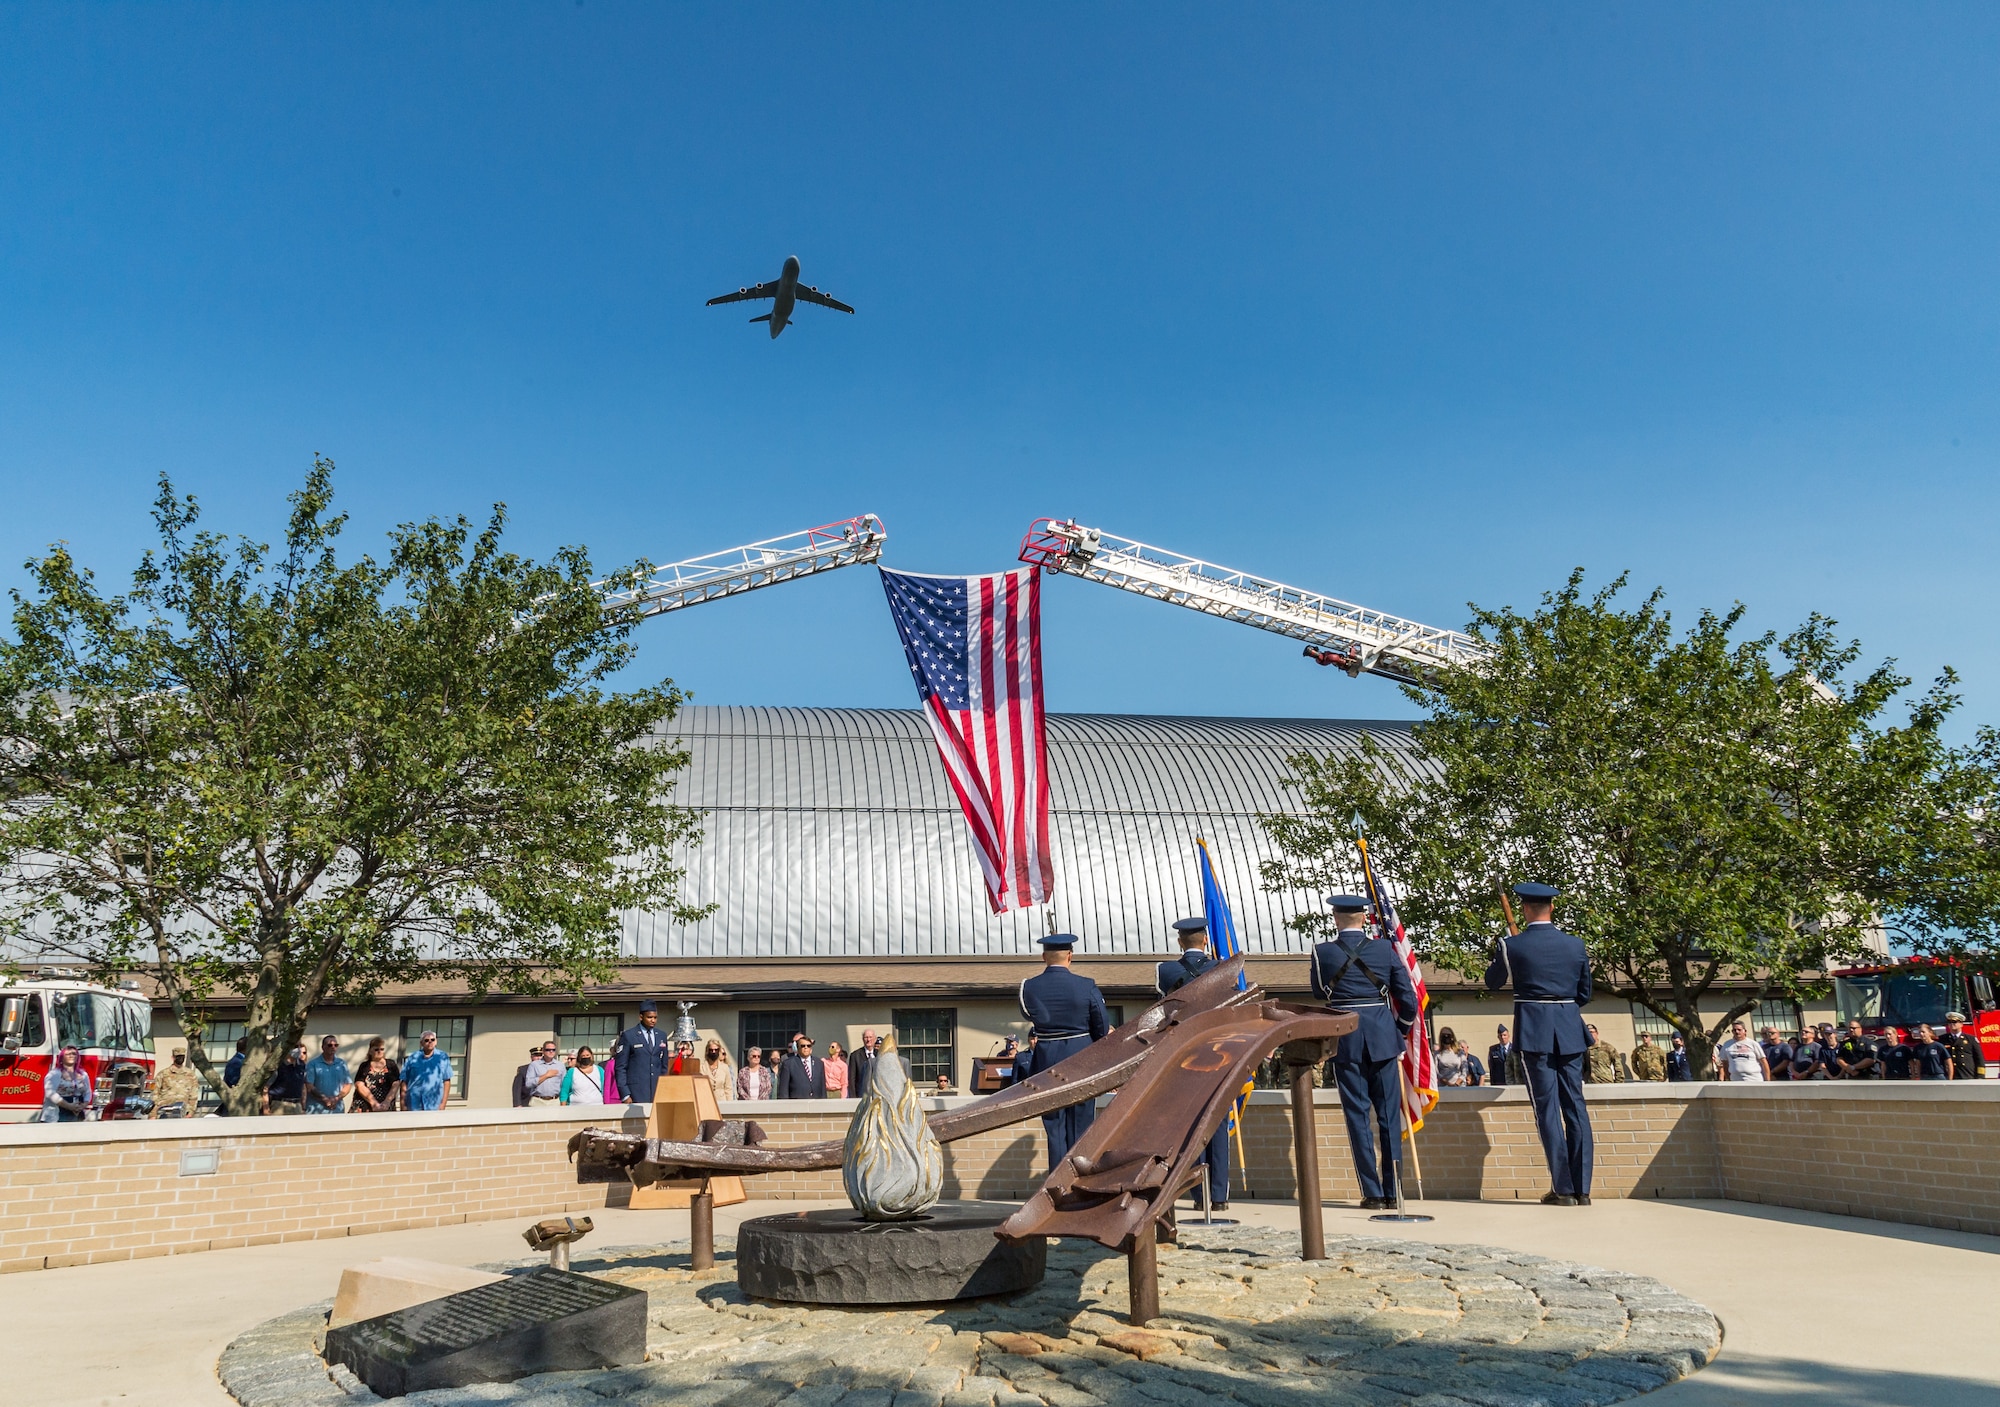 A C-5M Super Galaxy flies over the Air Mobility Command Museum during the 9/11 Remembrance Ceremony on Dover Air Force Base, Delaware, Sept. 11, 2021. The base commemorated  the 20th Anniversary of 9/11 to remember and honor those who perished in the attacks on Sept. 11, 2001. (U.S. Air Force photo by Roland Balik)